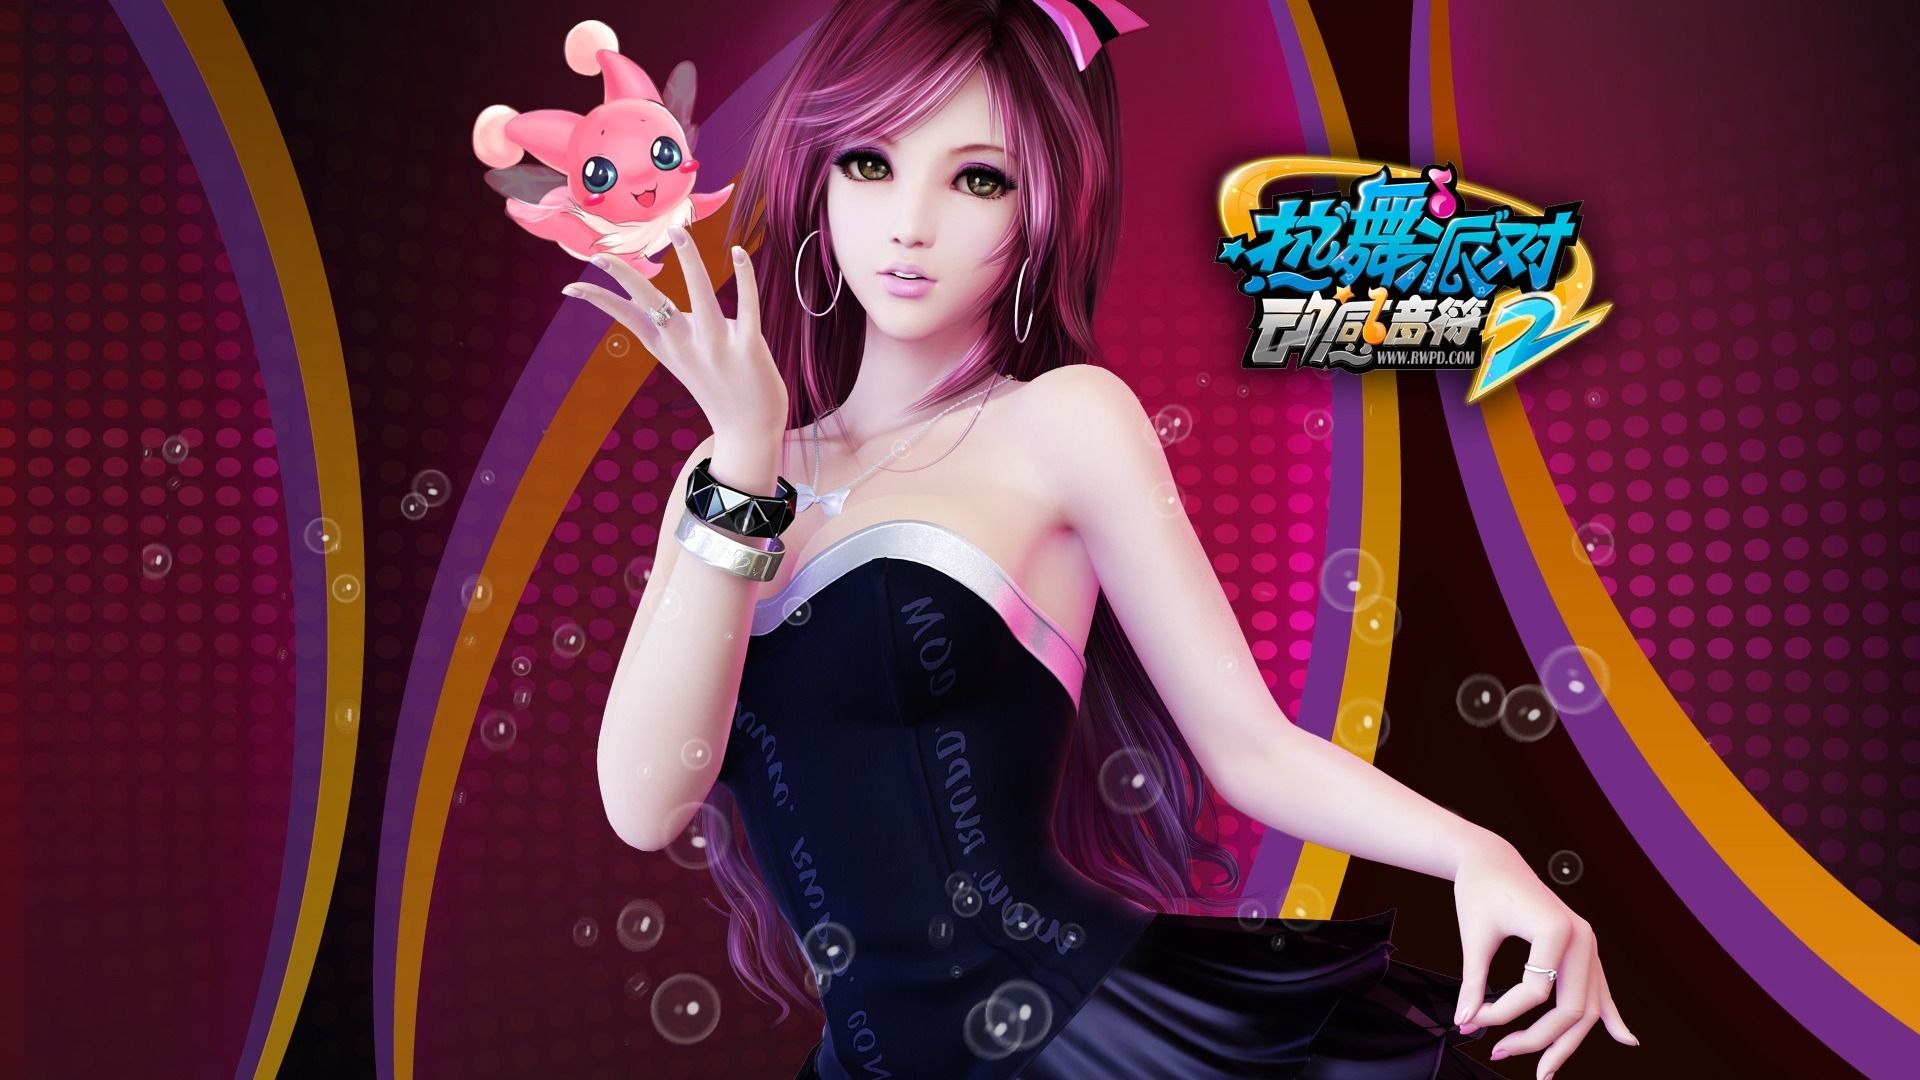 Online game Hot Dance Party II official wallpaper Wallpaper Download game Hot Dance Party II official wallpaper Wallpaper Wallpaper Site